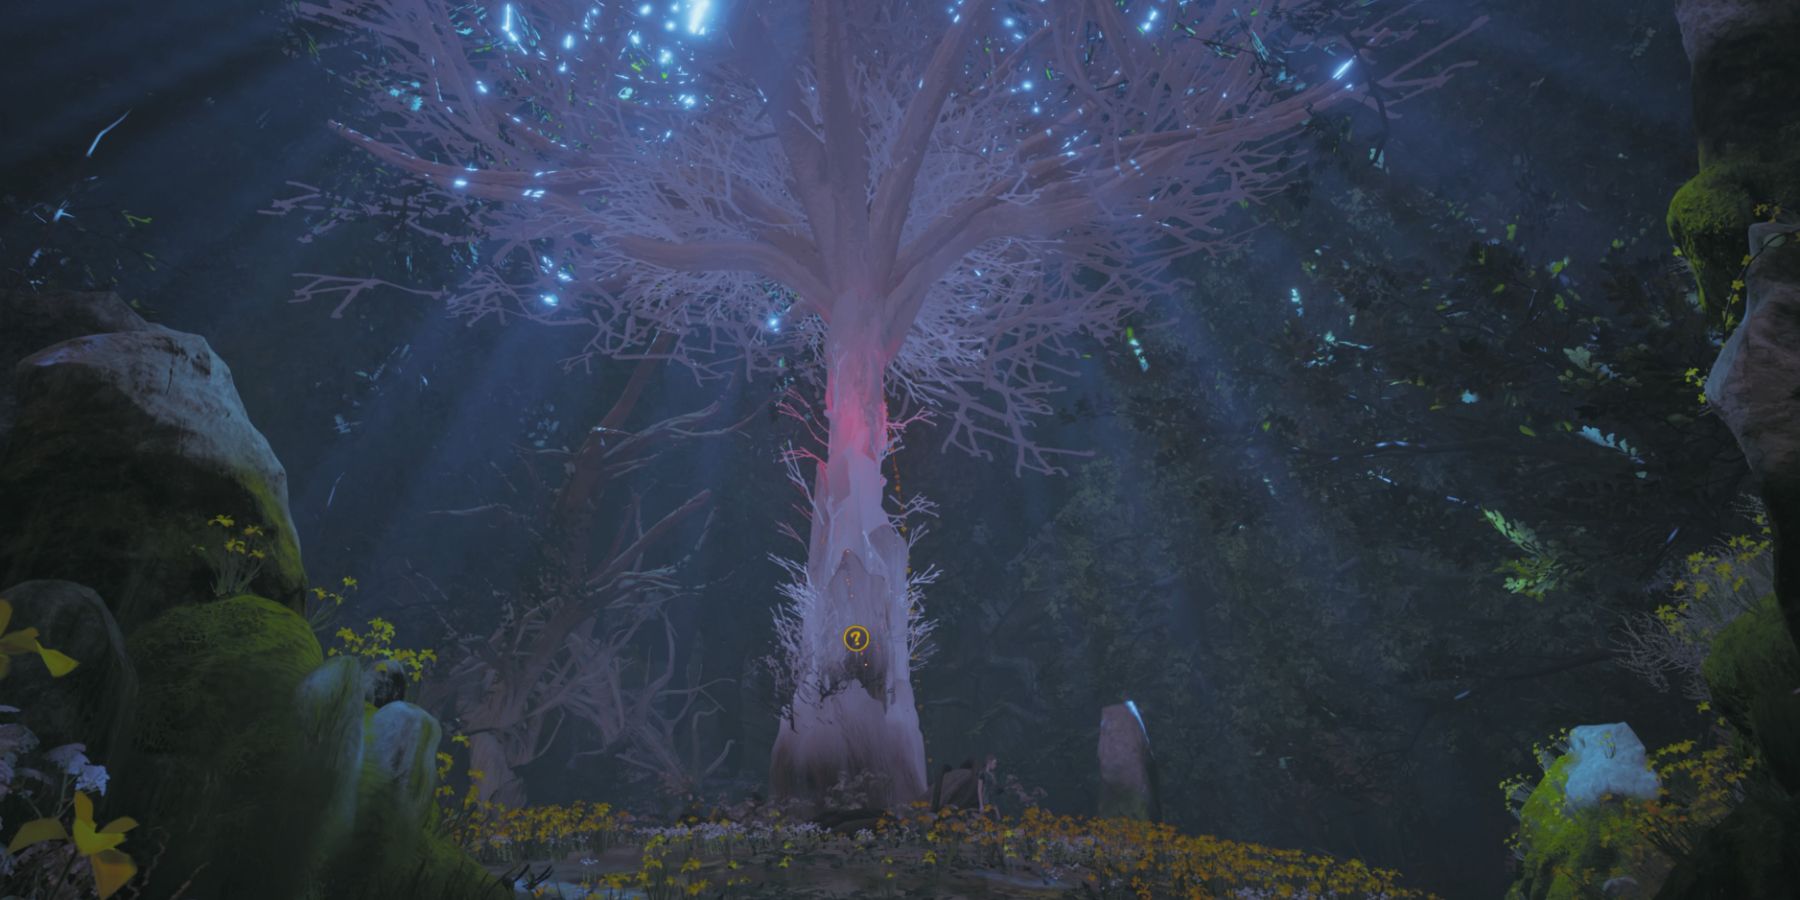 The Ritual Stone Tree in The Lord of the Rings: Gollum